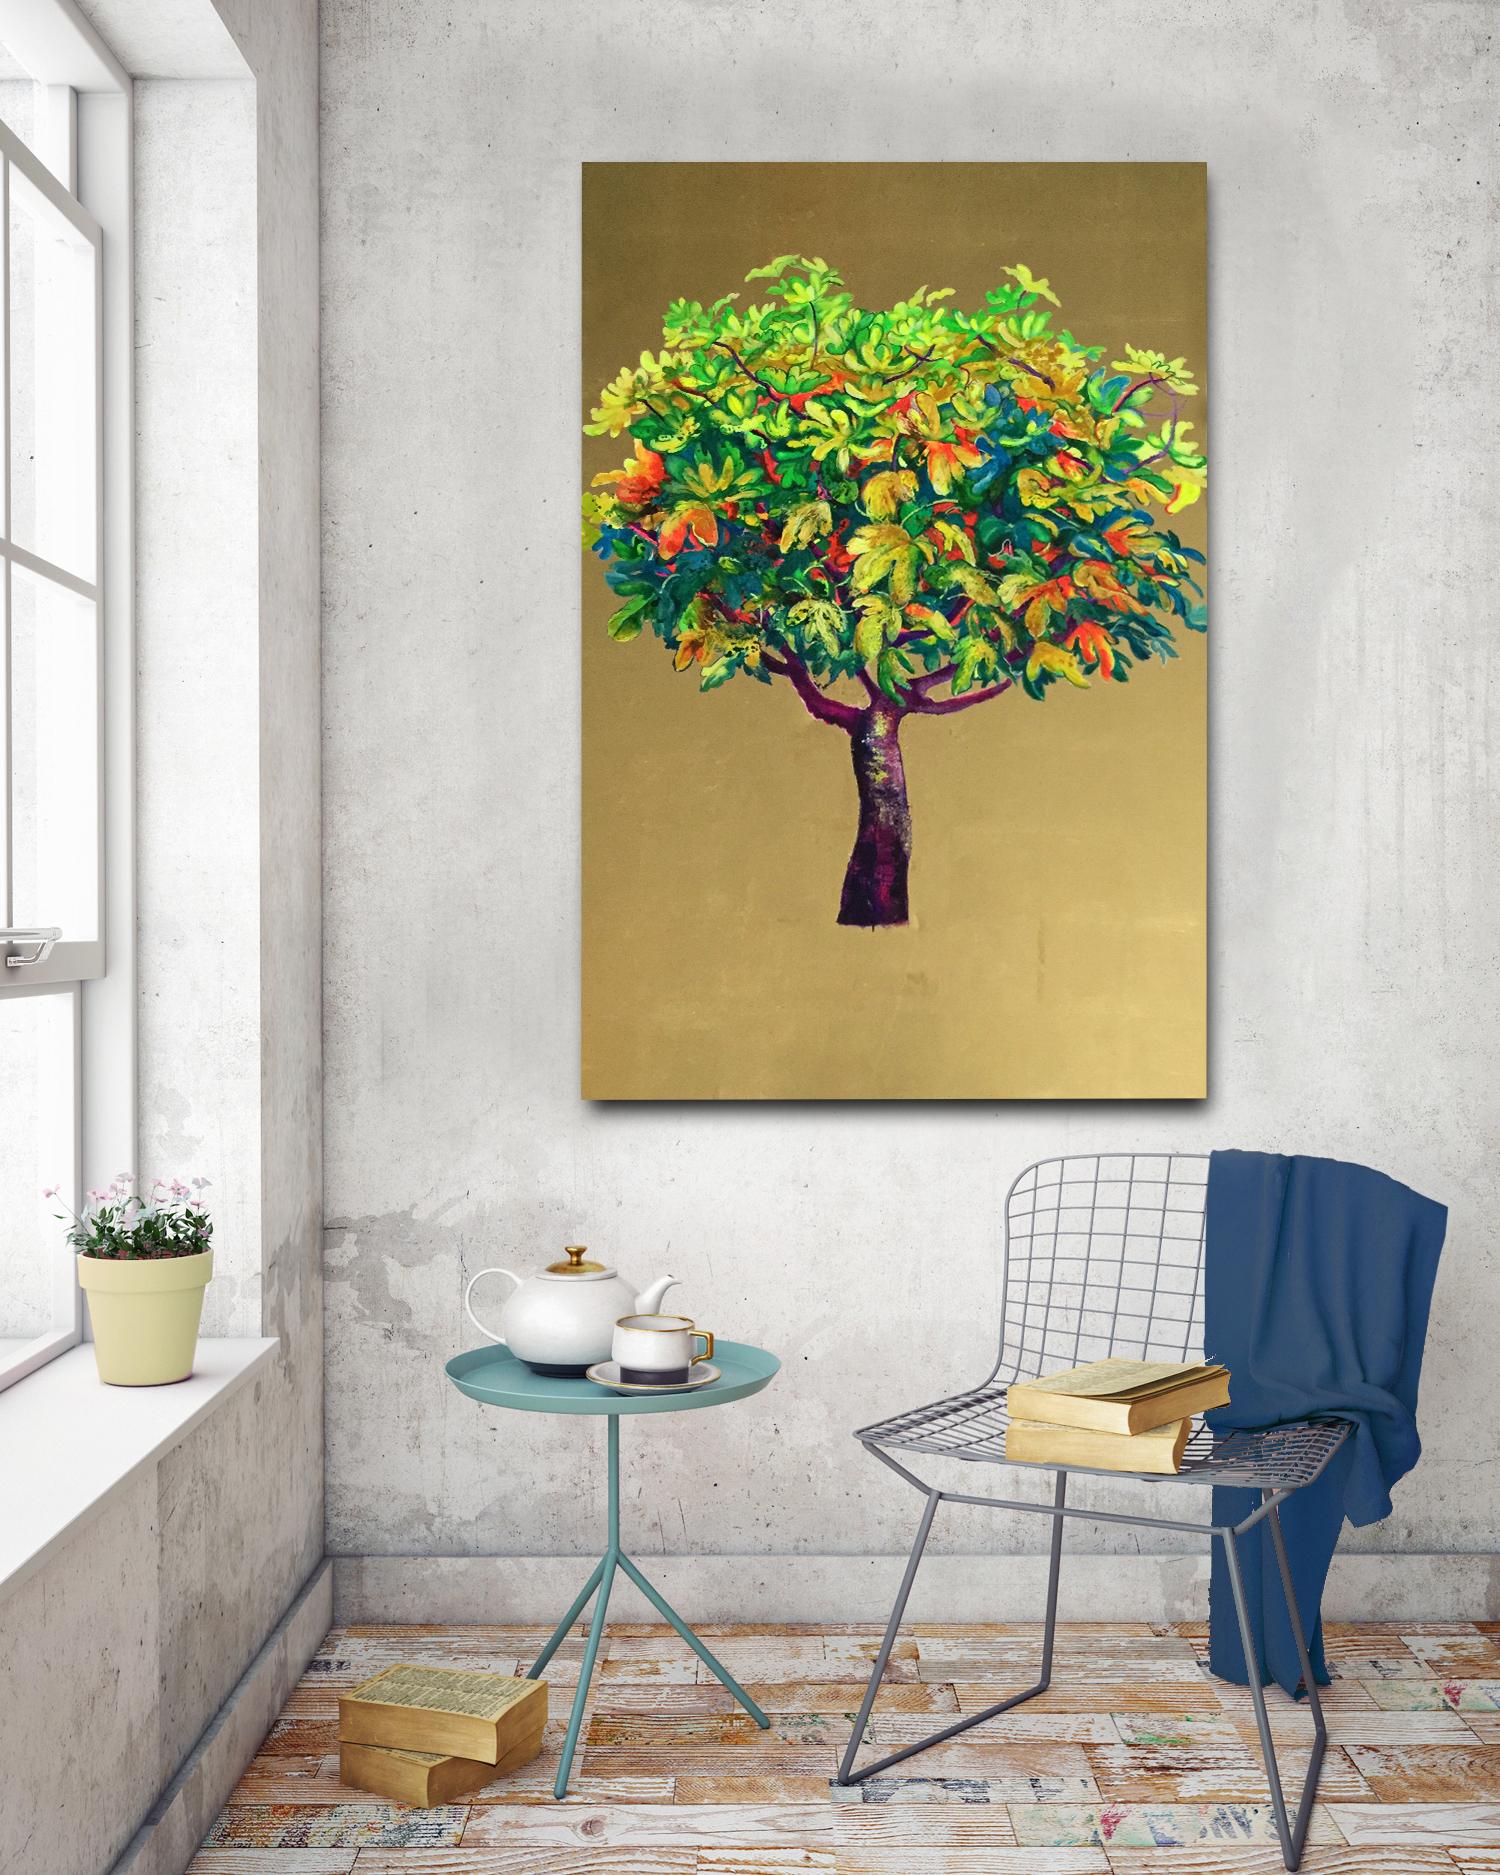 Capricciosa, Elegant oil on canvas with gold leaf, lush tree with green leaves - Contemporary Painting by Anastasia Gklava